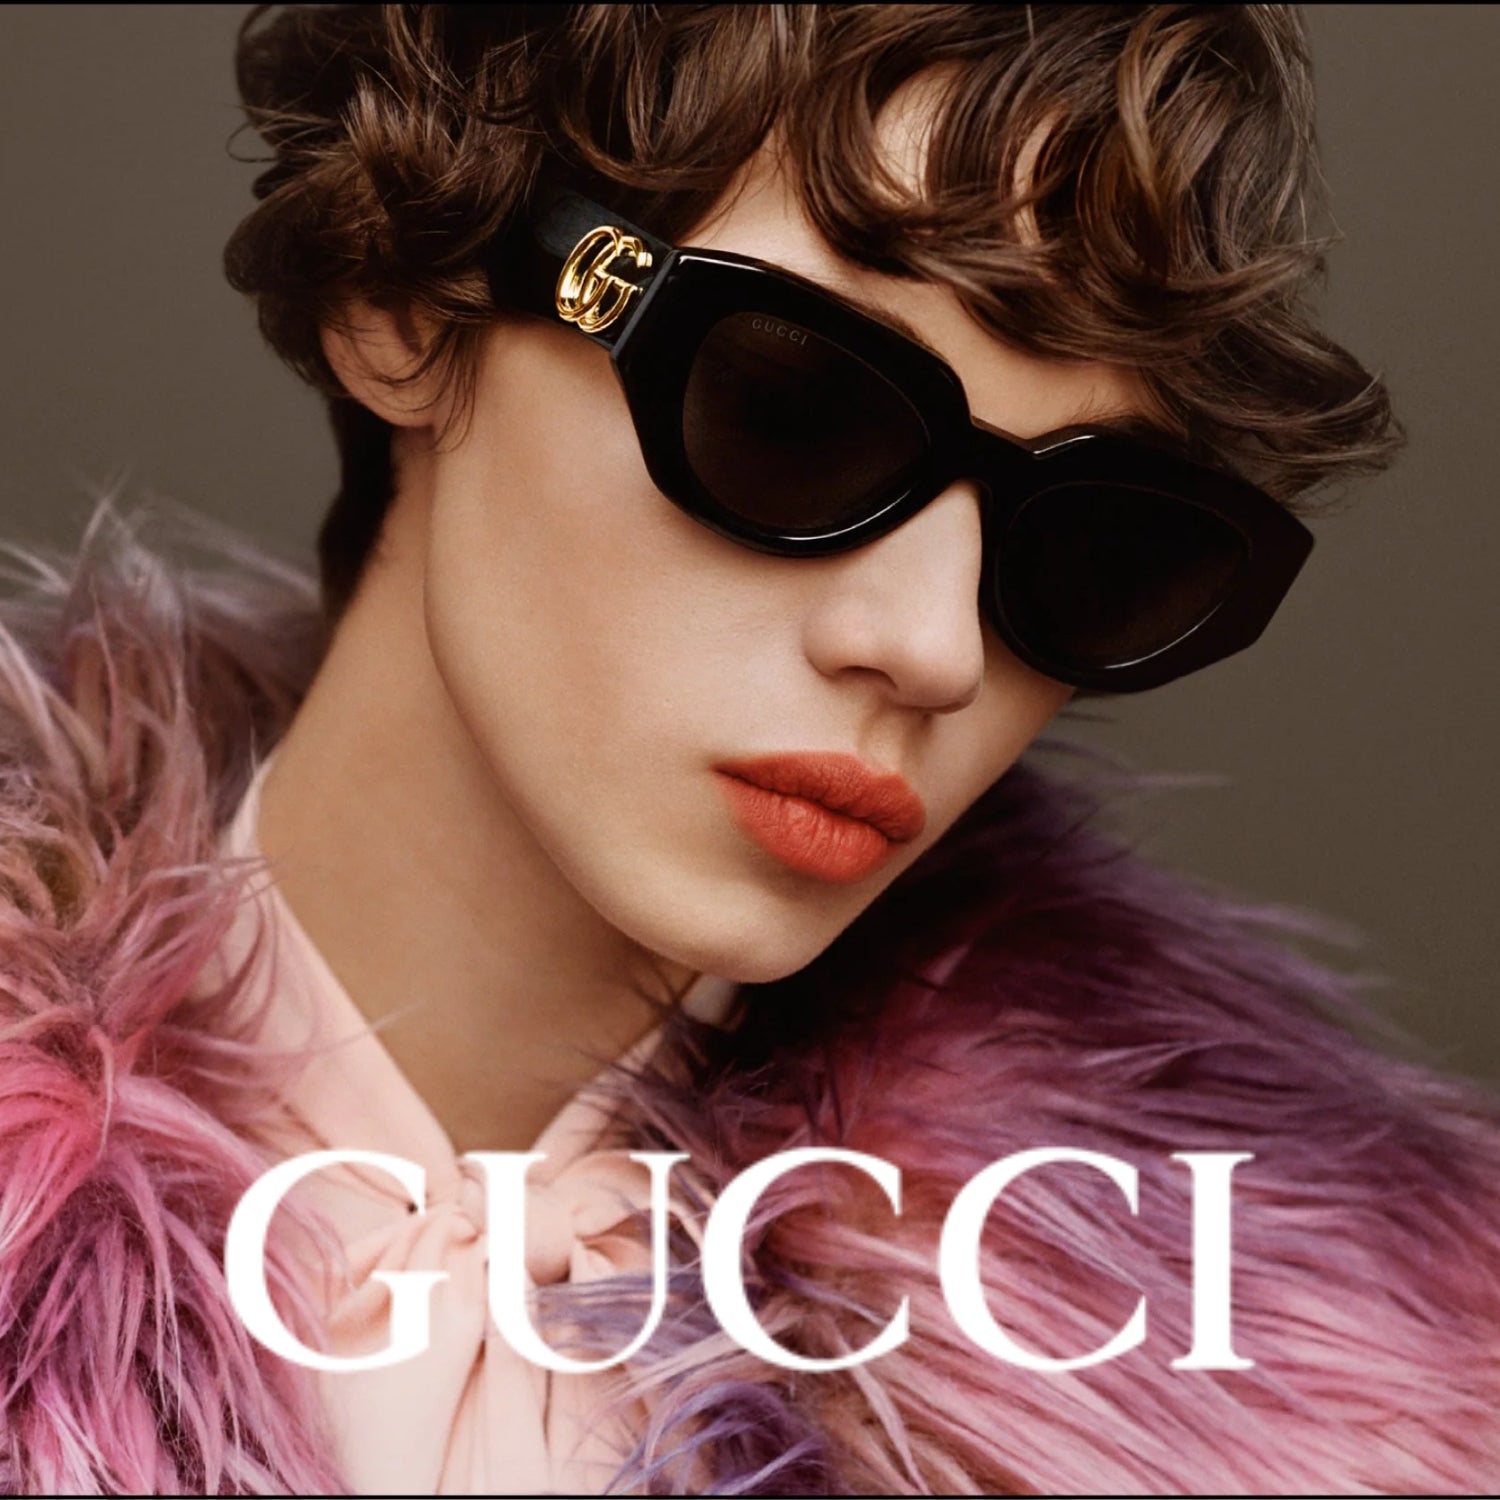 "Optorium: Gucci eyewear sunglasses for men and women. Explore our stylish opticals collection."